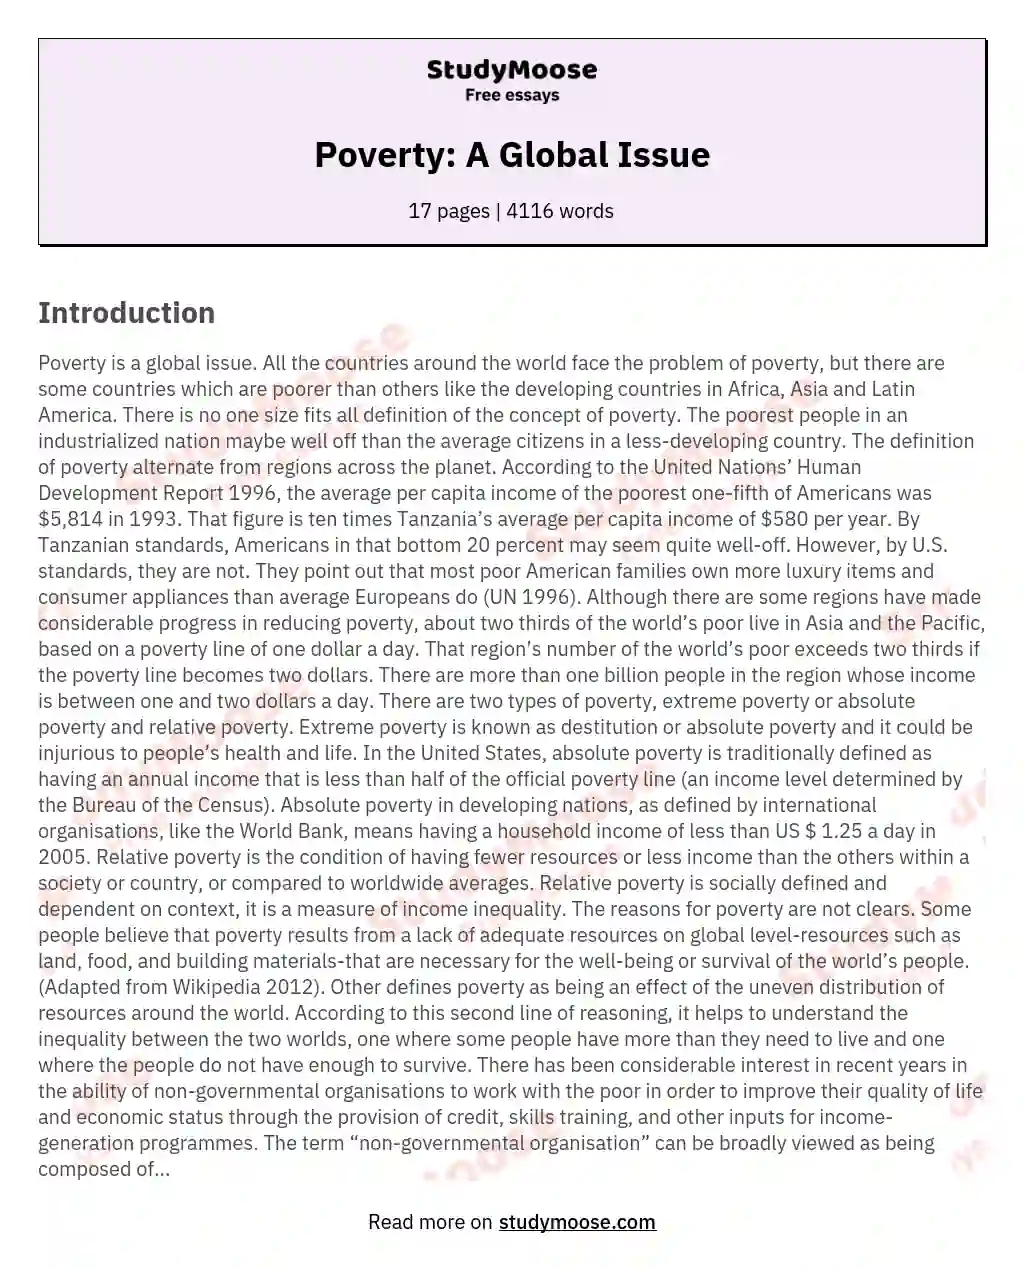 Poverty: A Global Issue essay